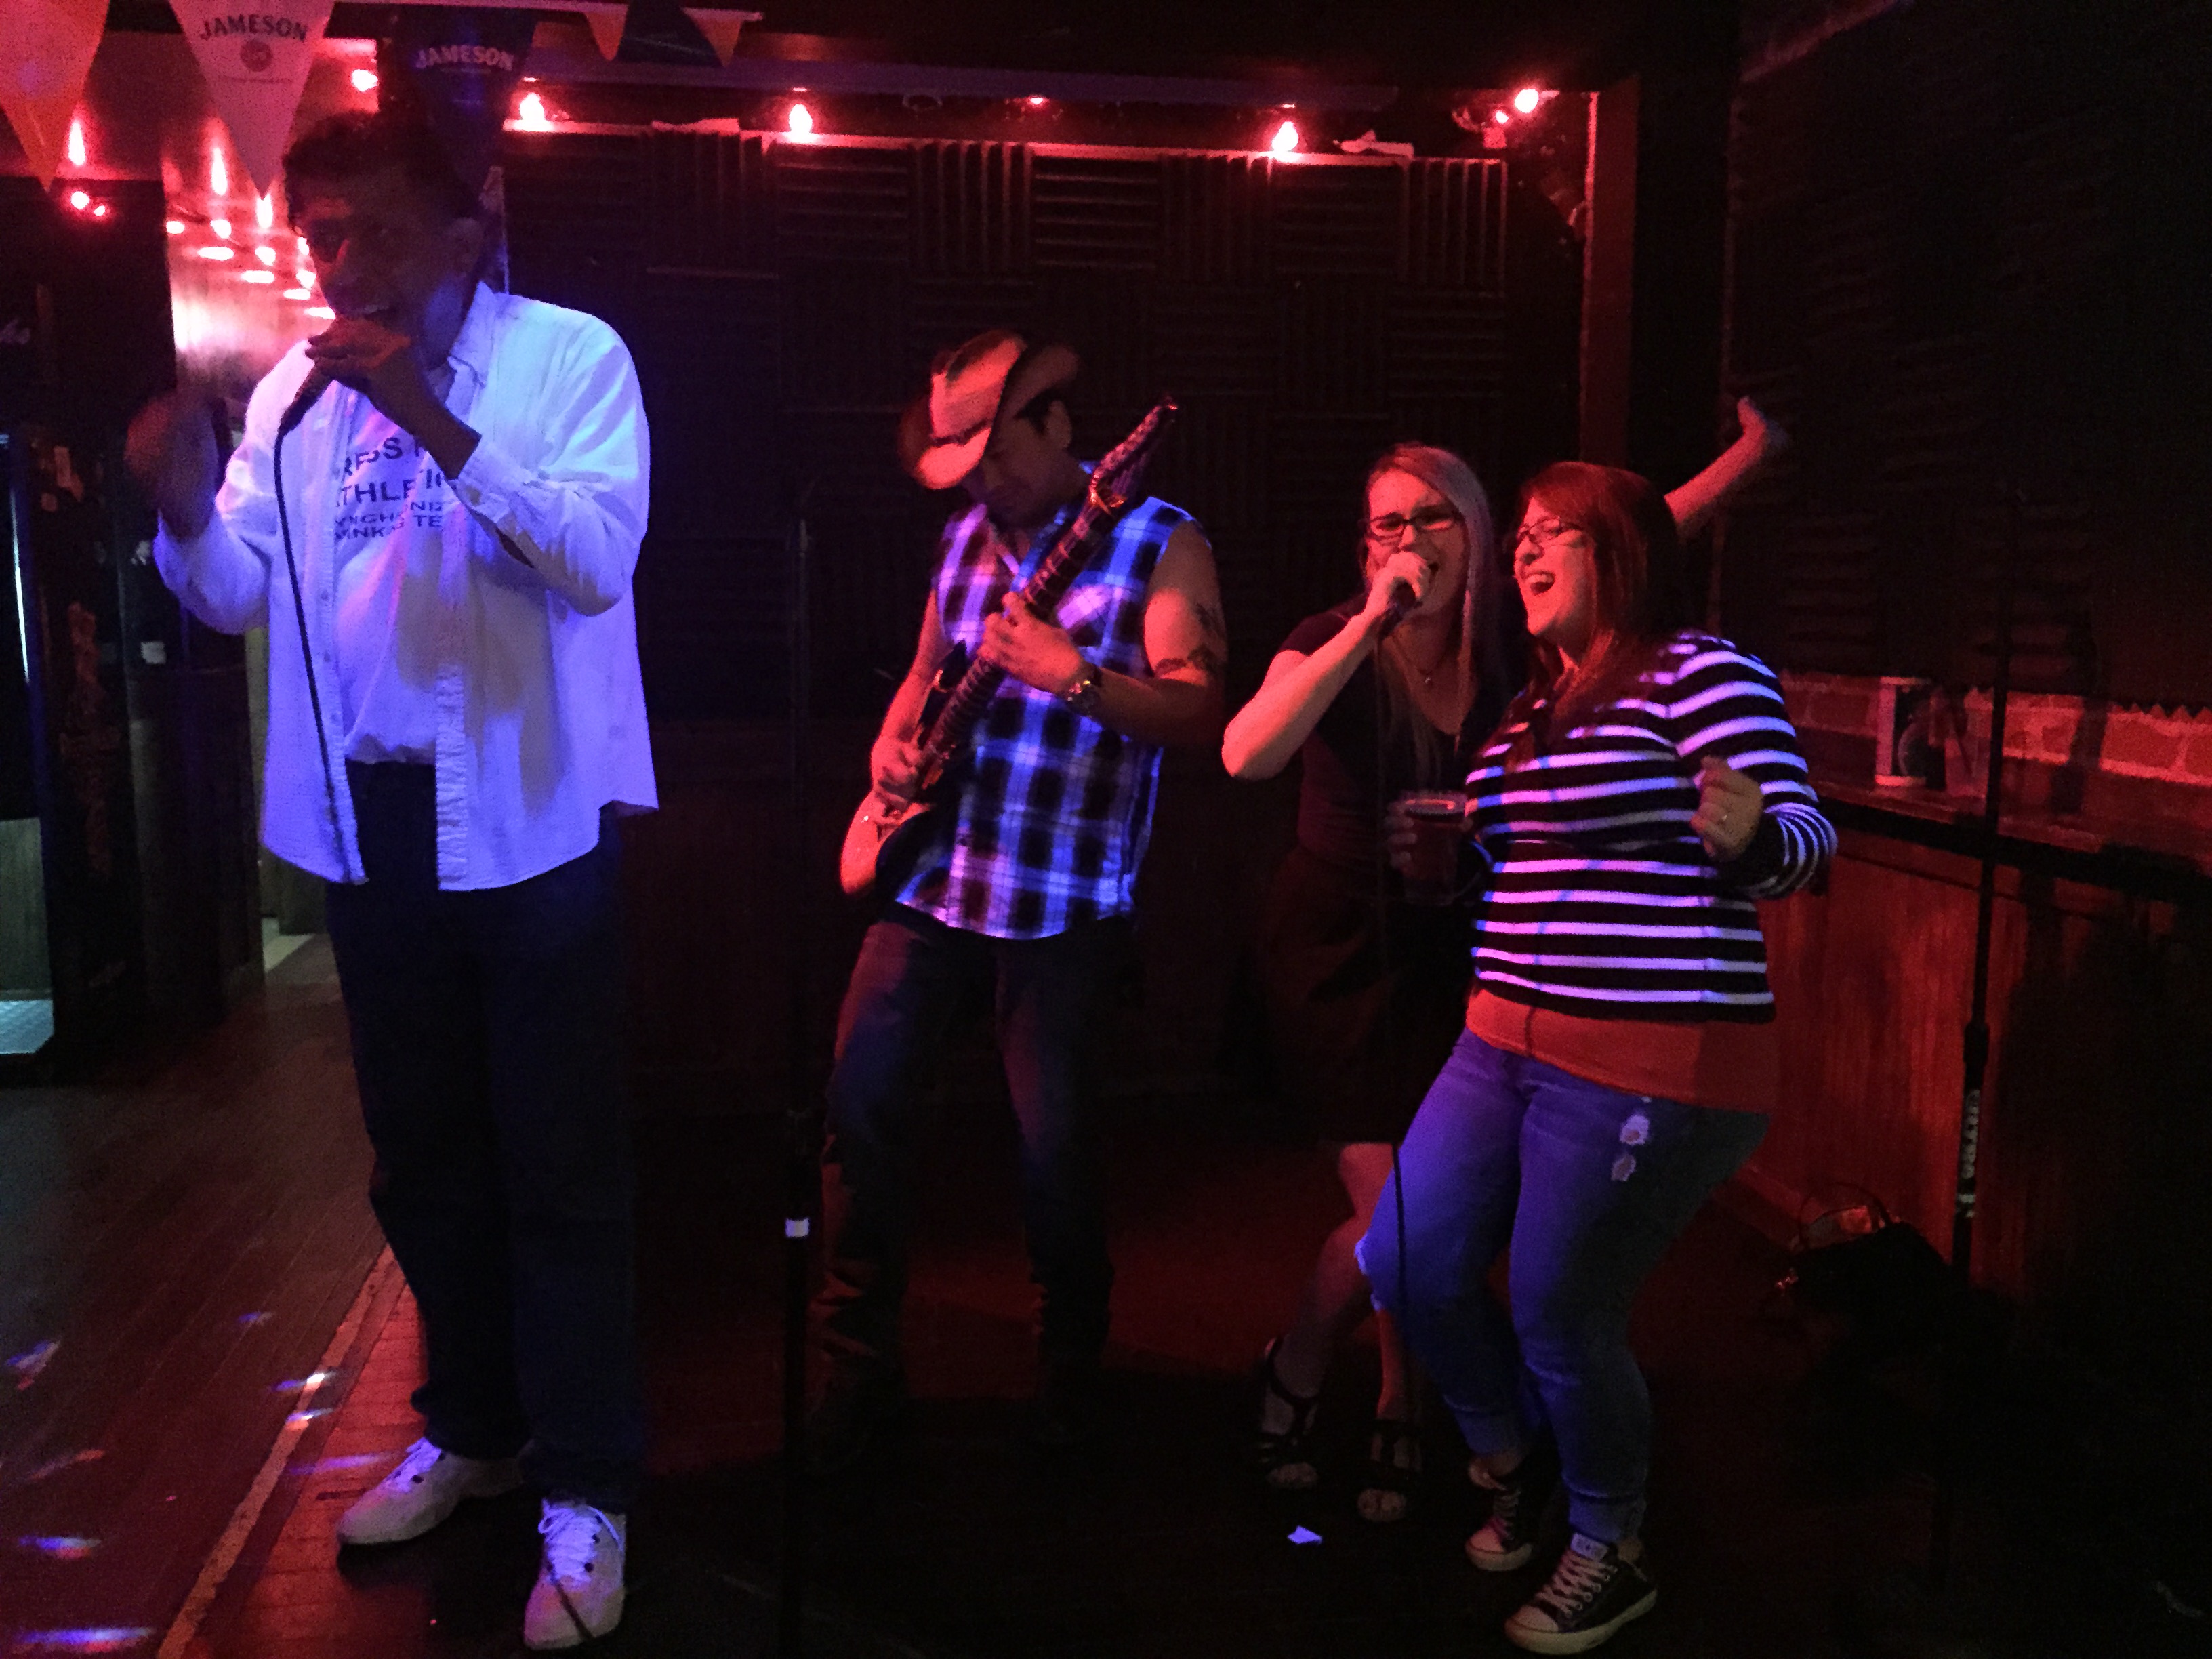 Some awesome craft cocktails can get you up on the stage for karaoke! Especially when it's your birthday at Whiskey Richards! -Erin Maloney